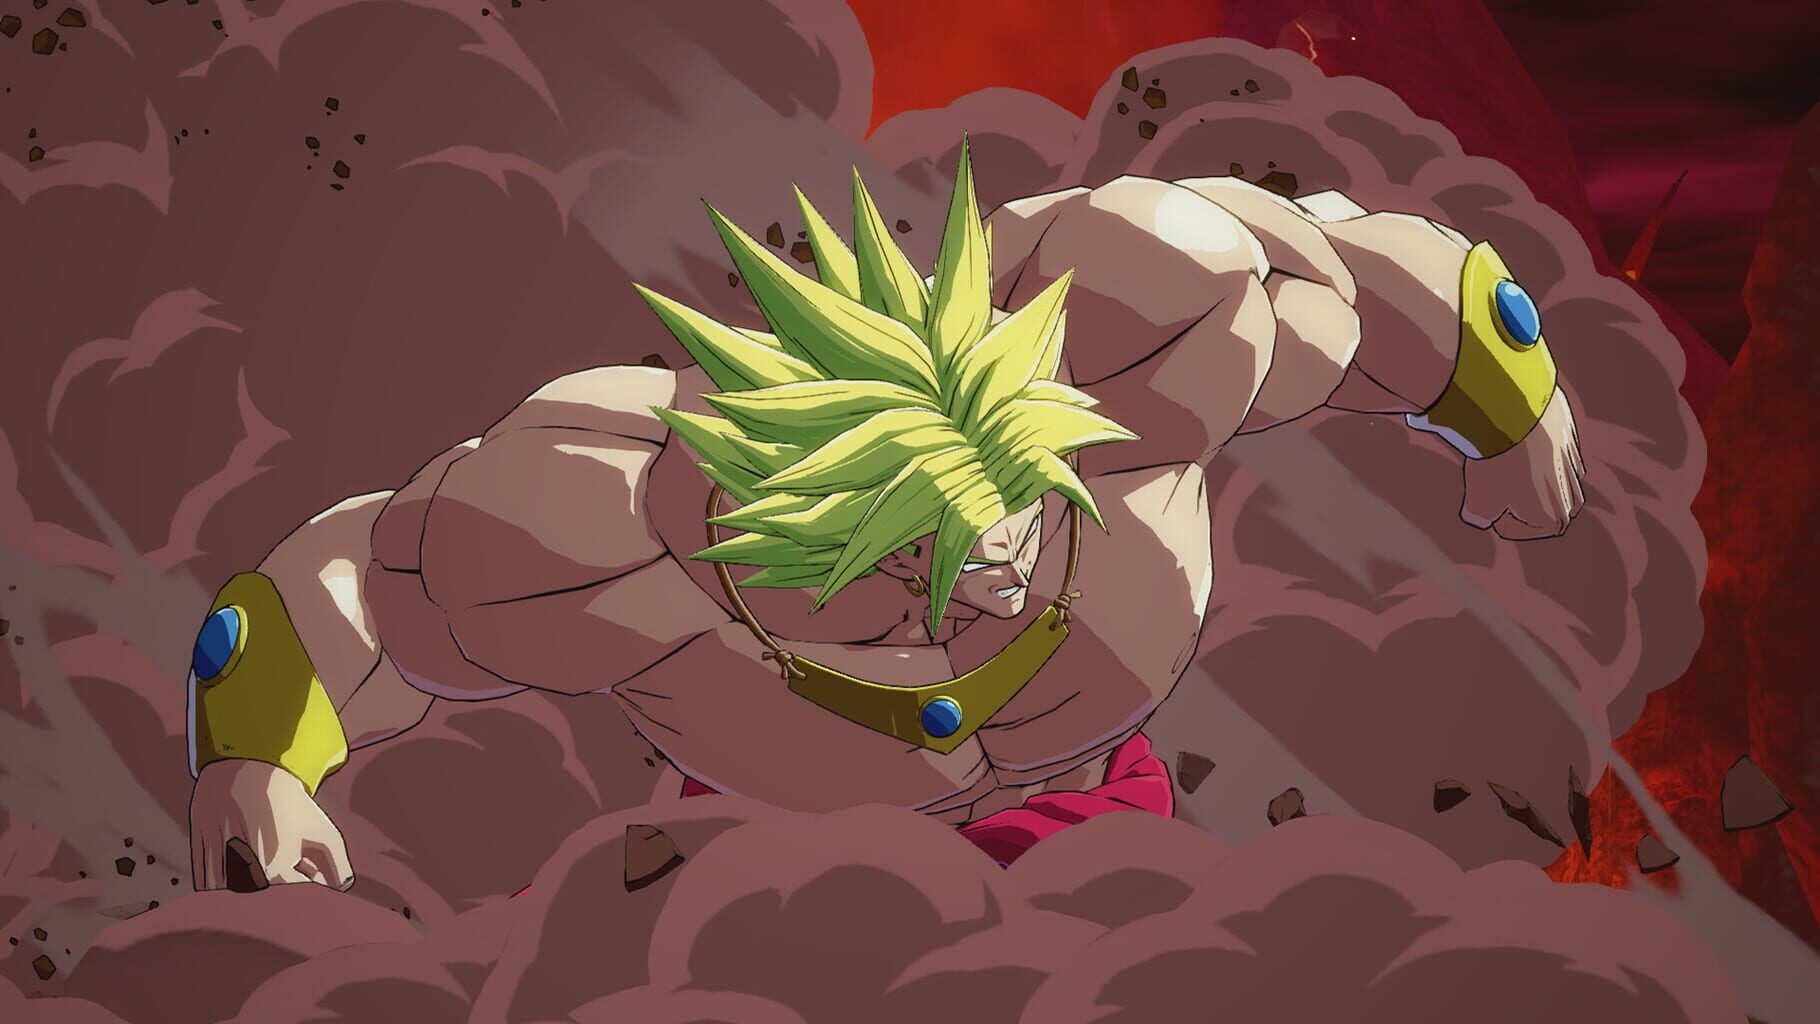 Dragon Ball FighterZ: Broly Image